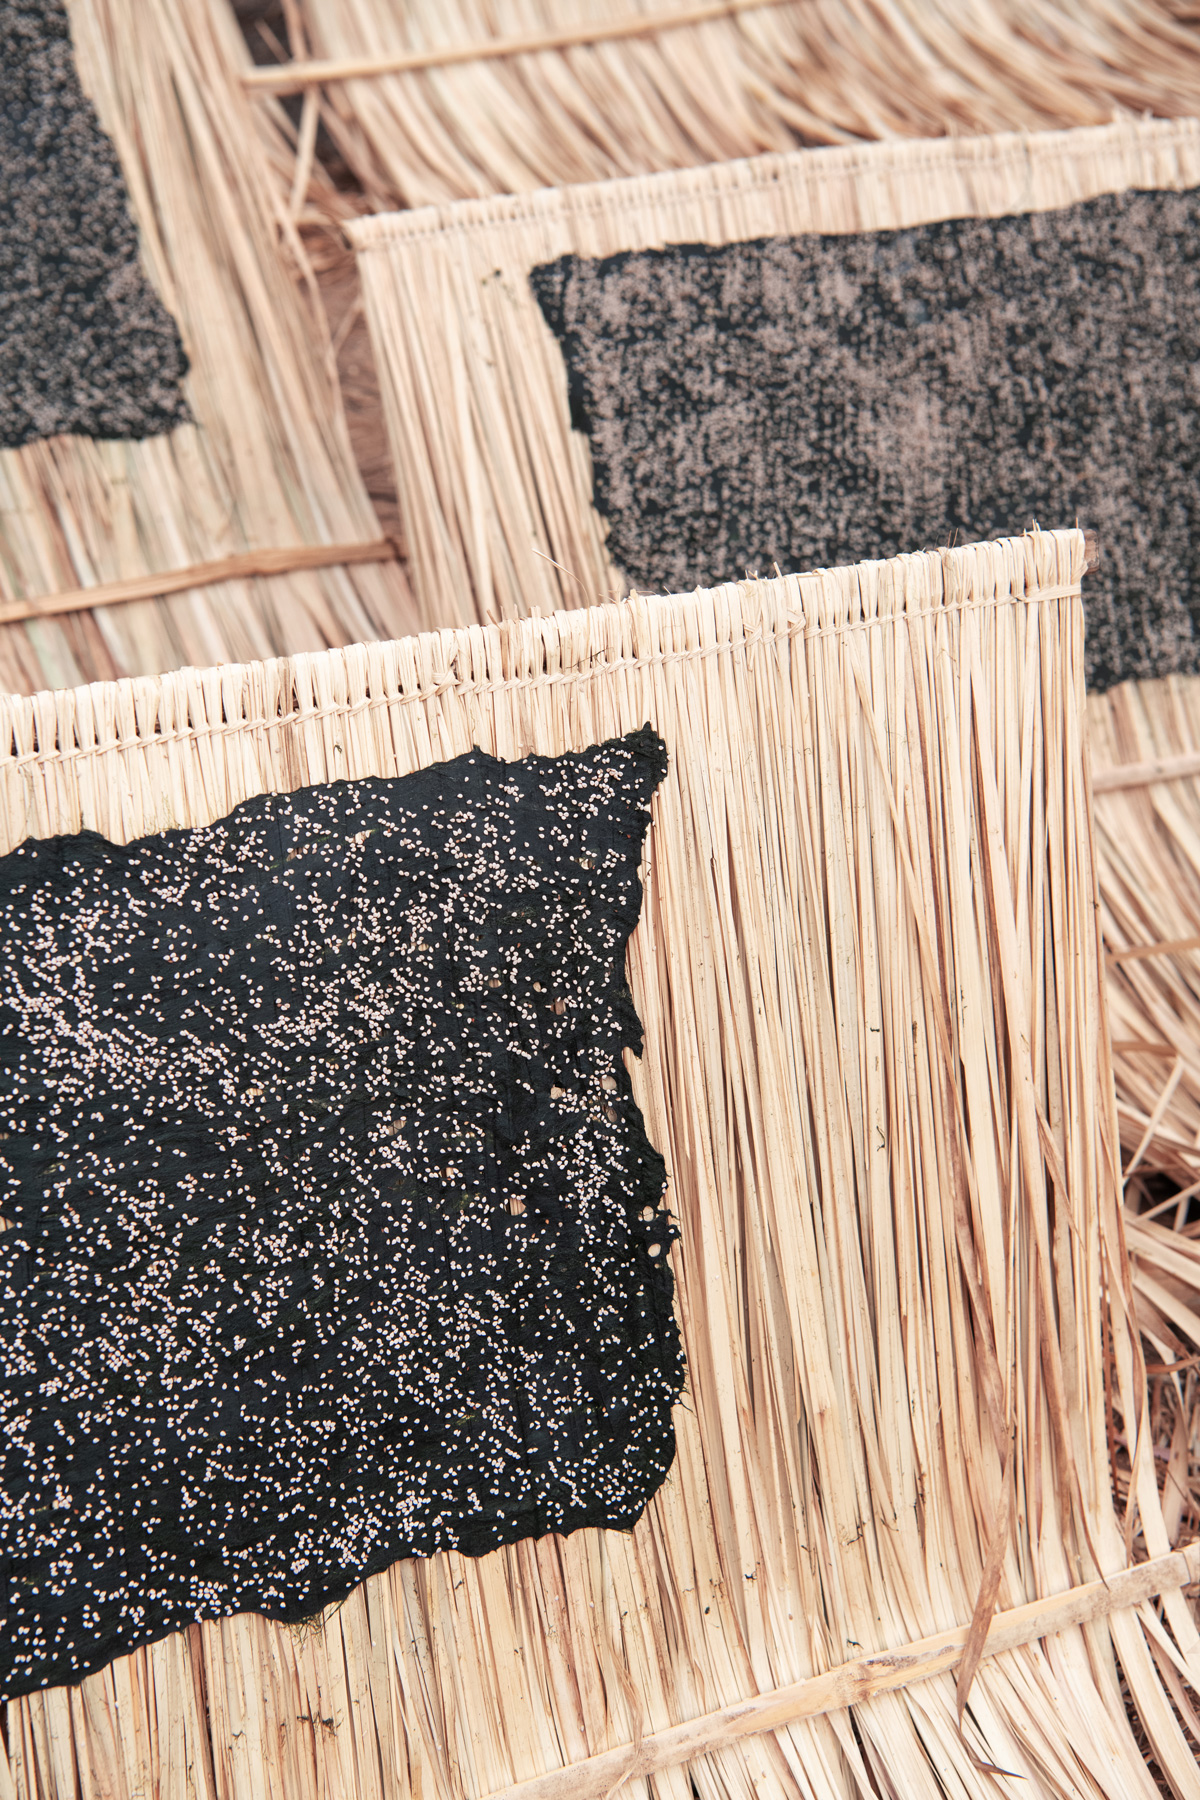 a straw mat with black substance